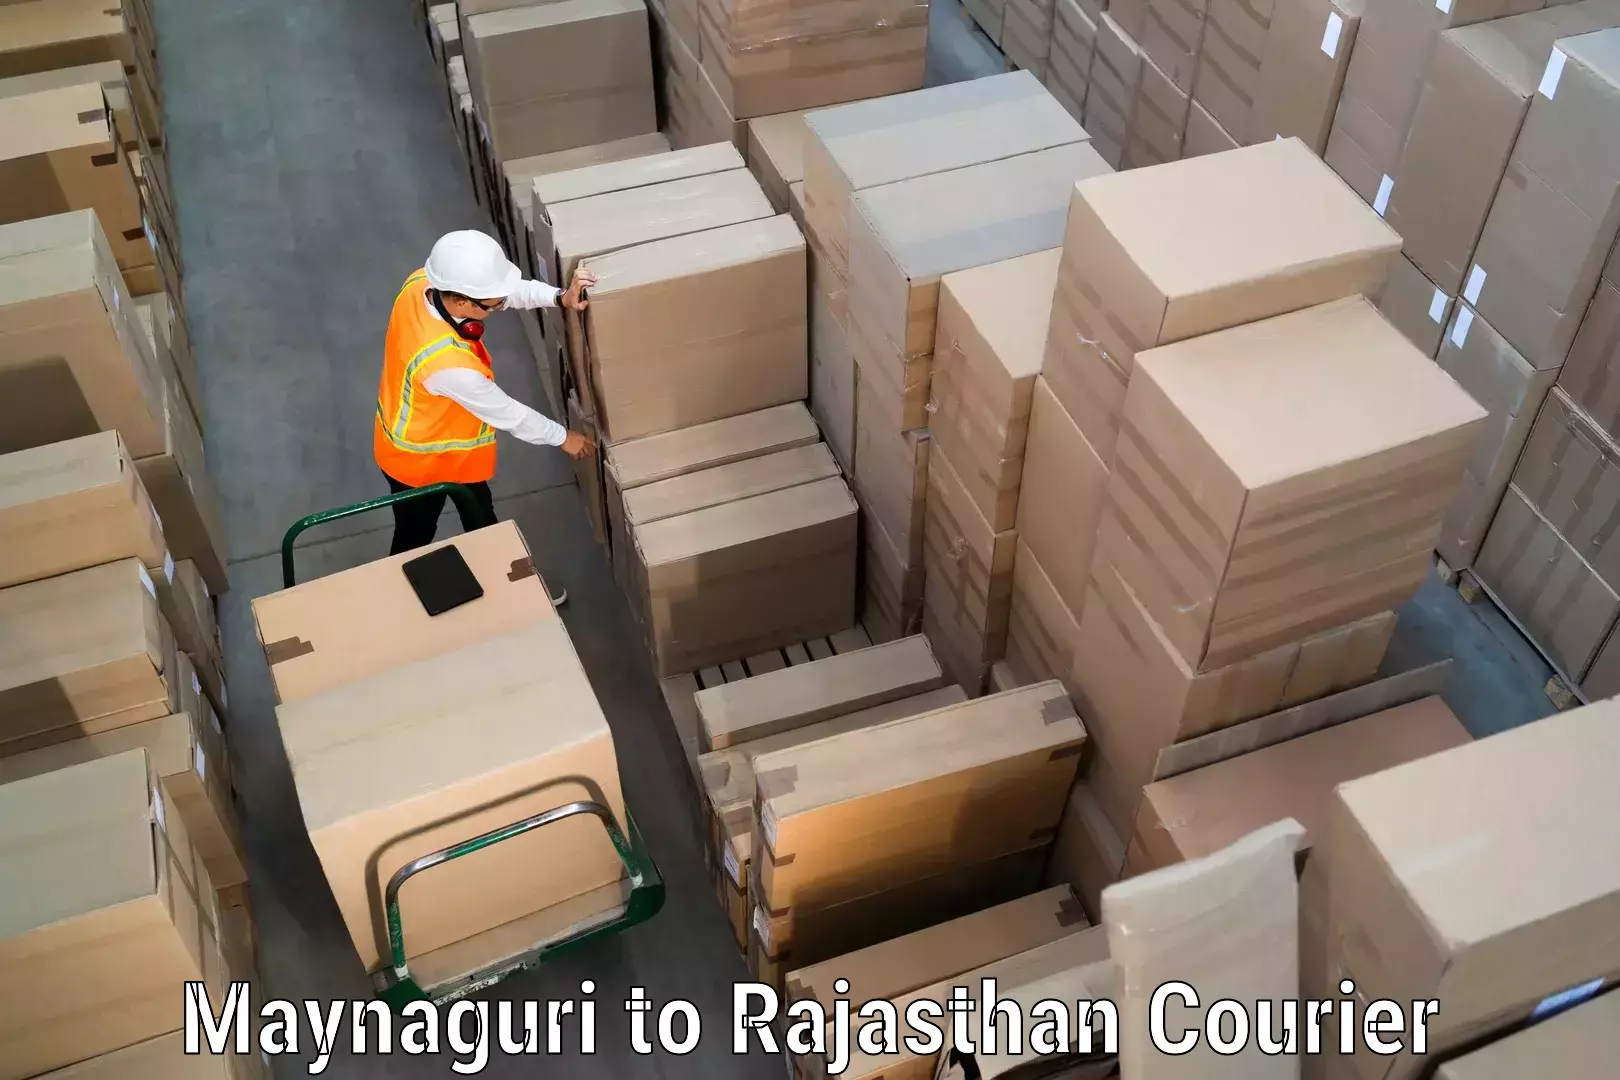 Air courier services Maynaguri to Rajasthan